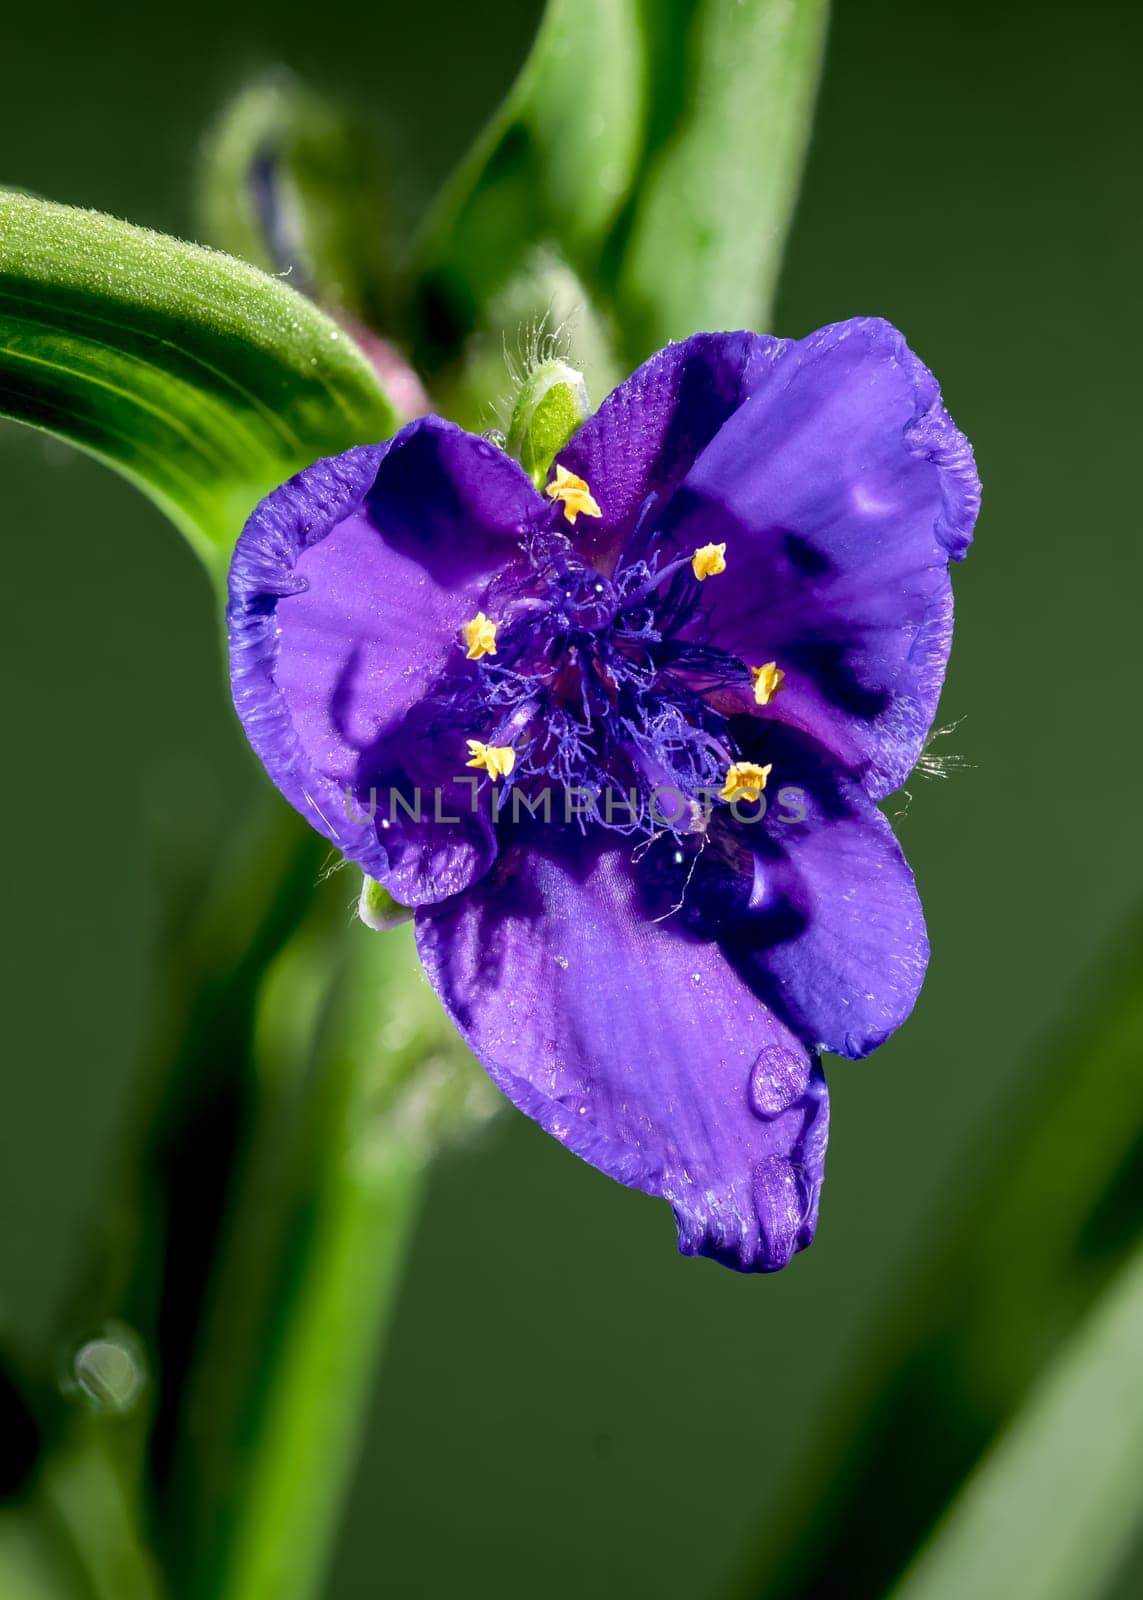 Violet Tradescantia flowers on a green background by Multipedia